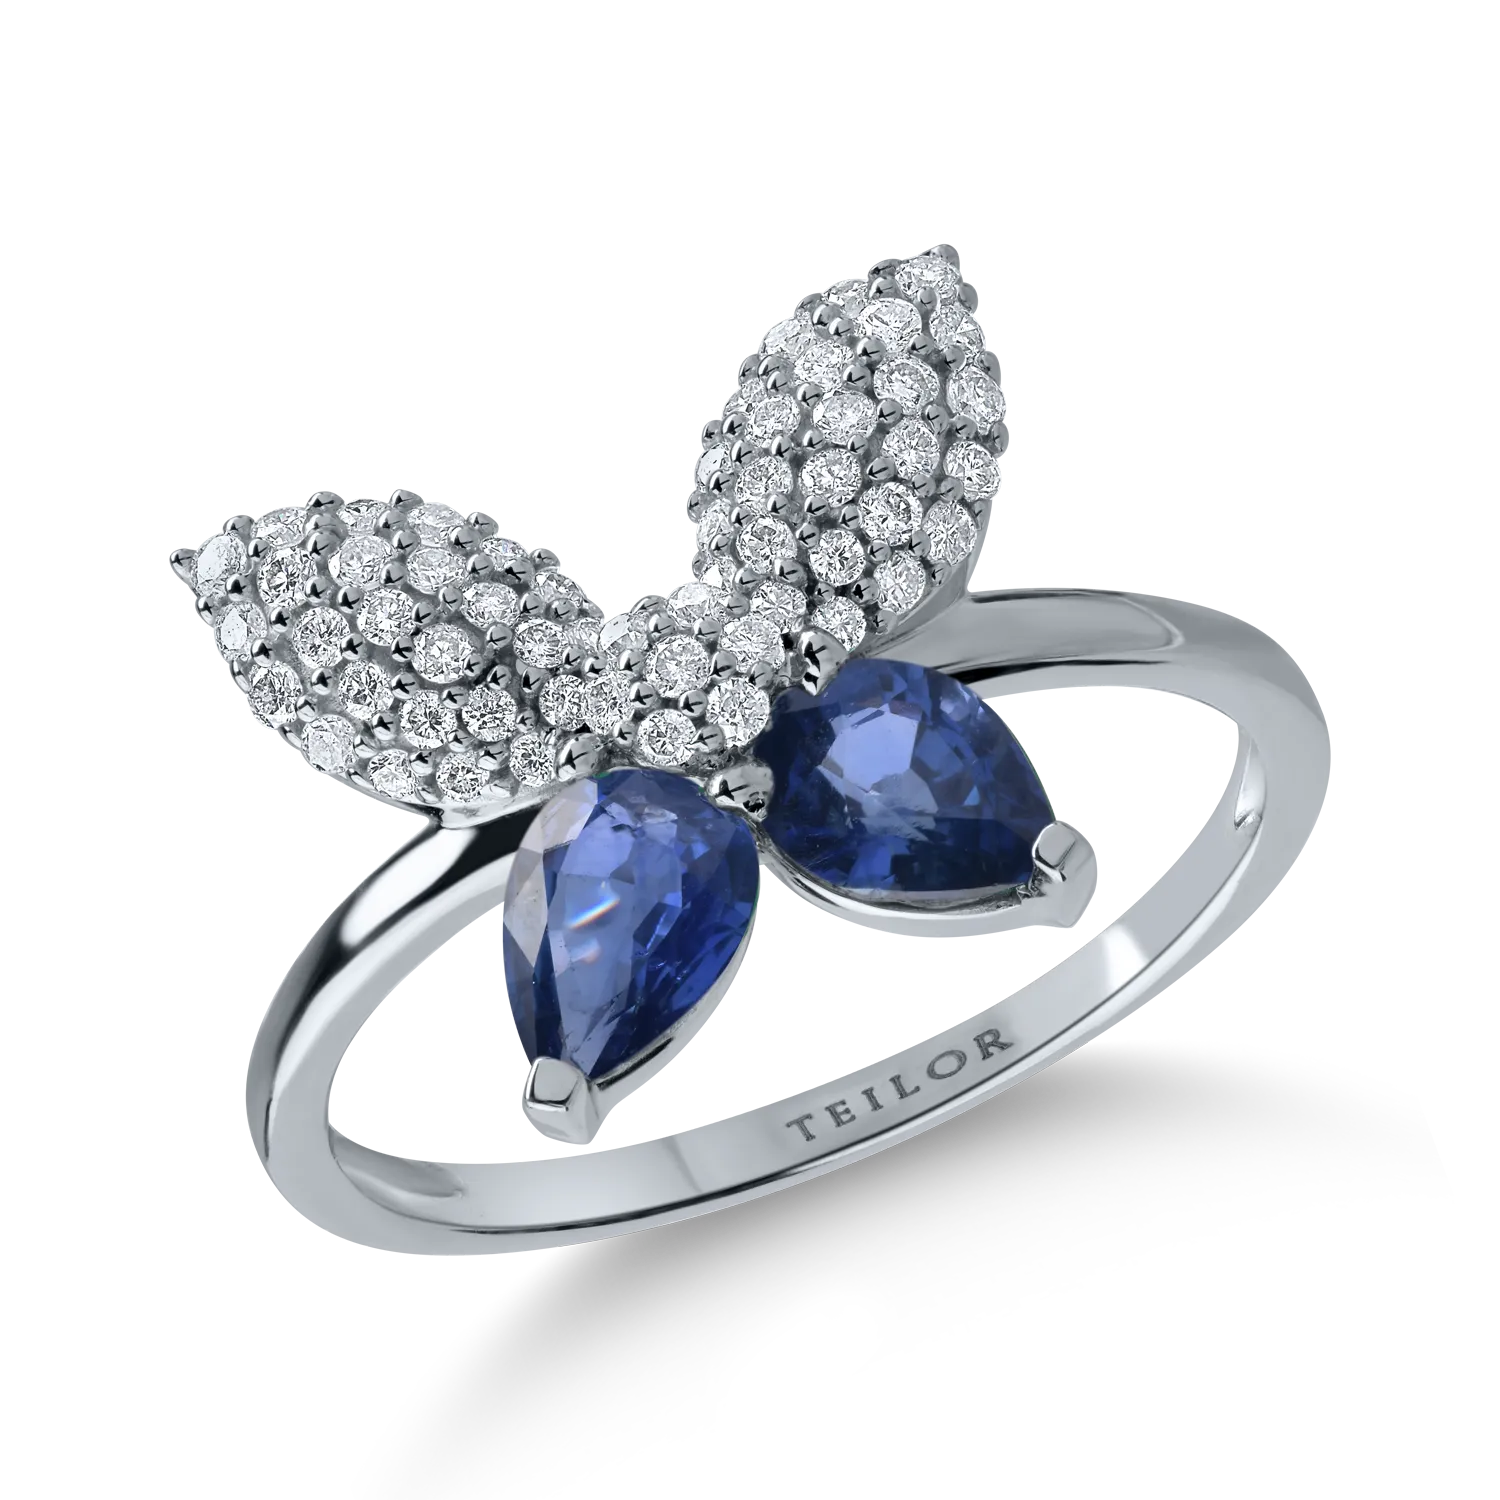 White gold butterfly ring with 1.02ct sapphires and 0.28ct diamonds